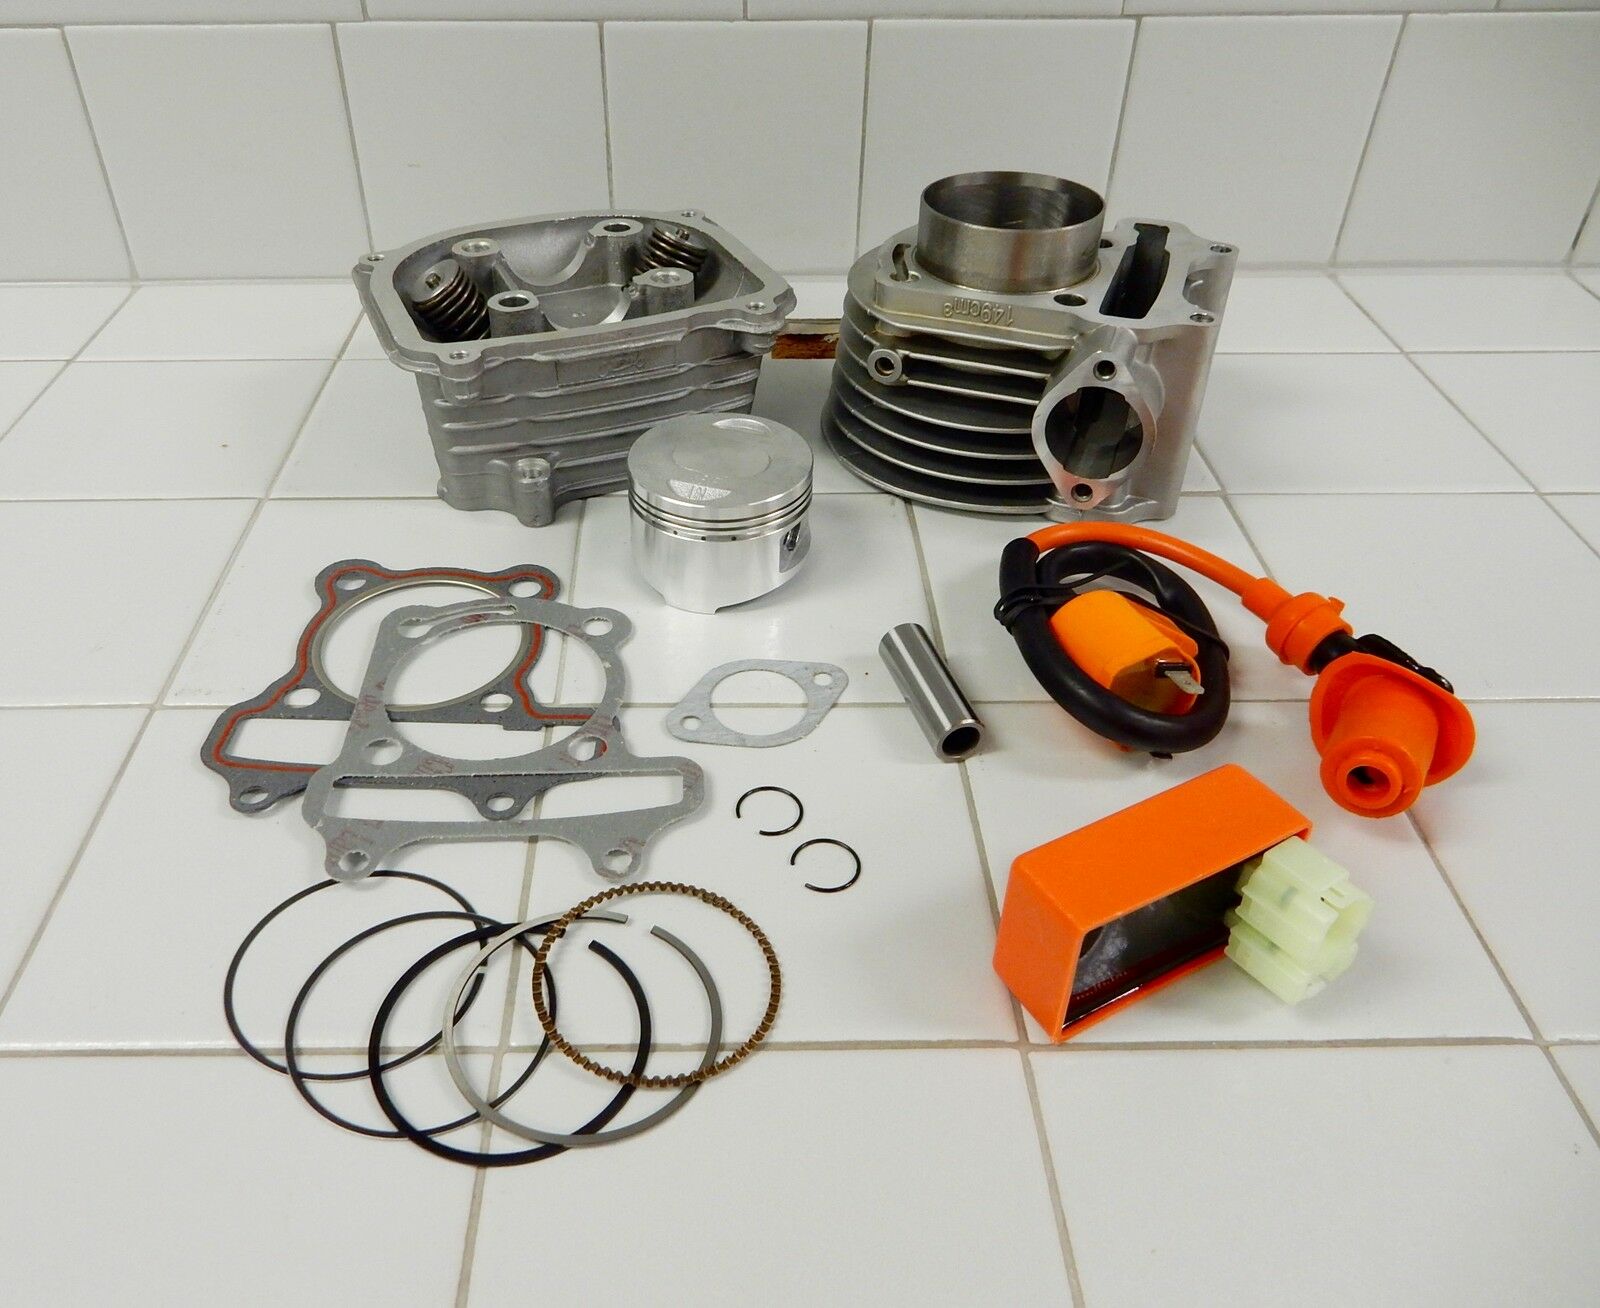 61mm Big Bore Kit (172cc) Engine Rebuild Kit For Scooters W/ 150cc Gy6 Motor #5